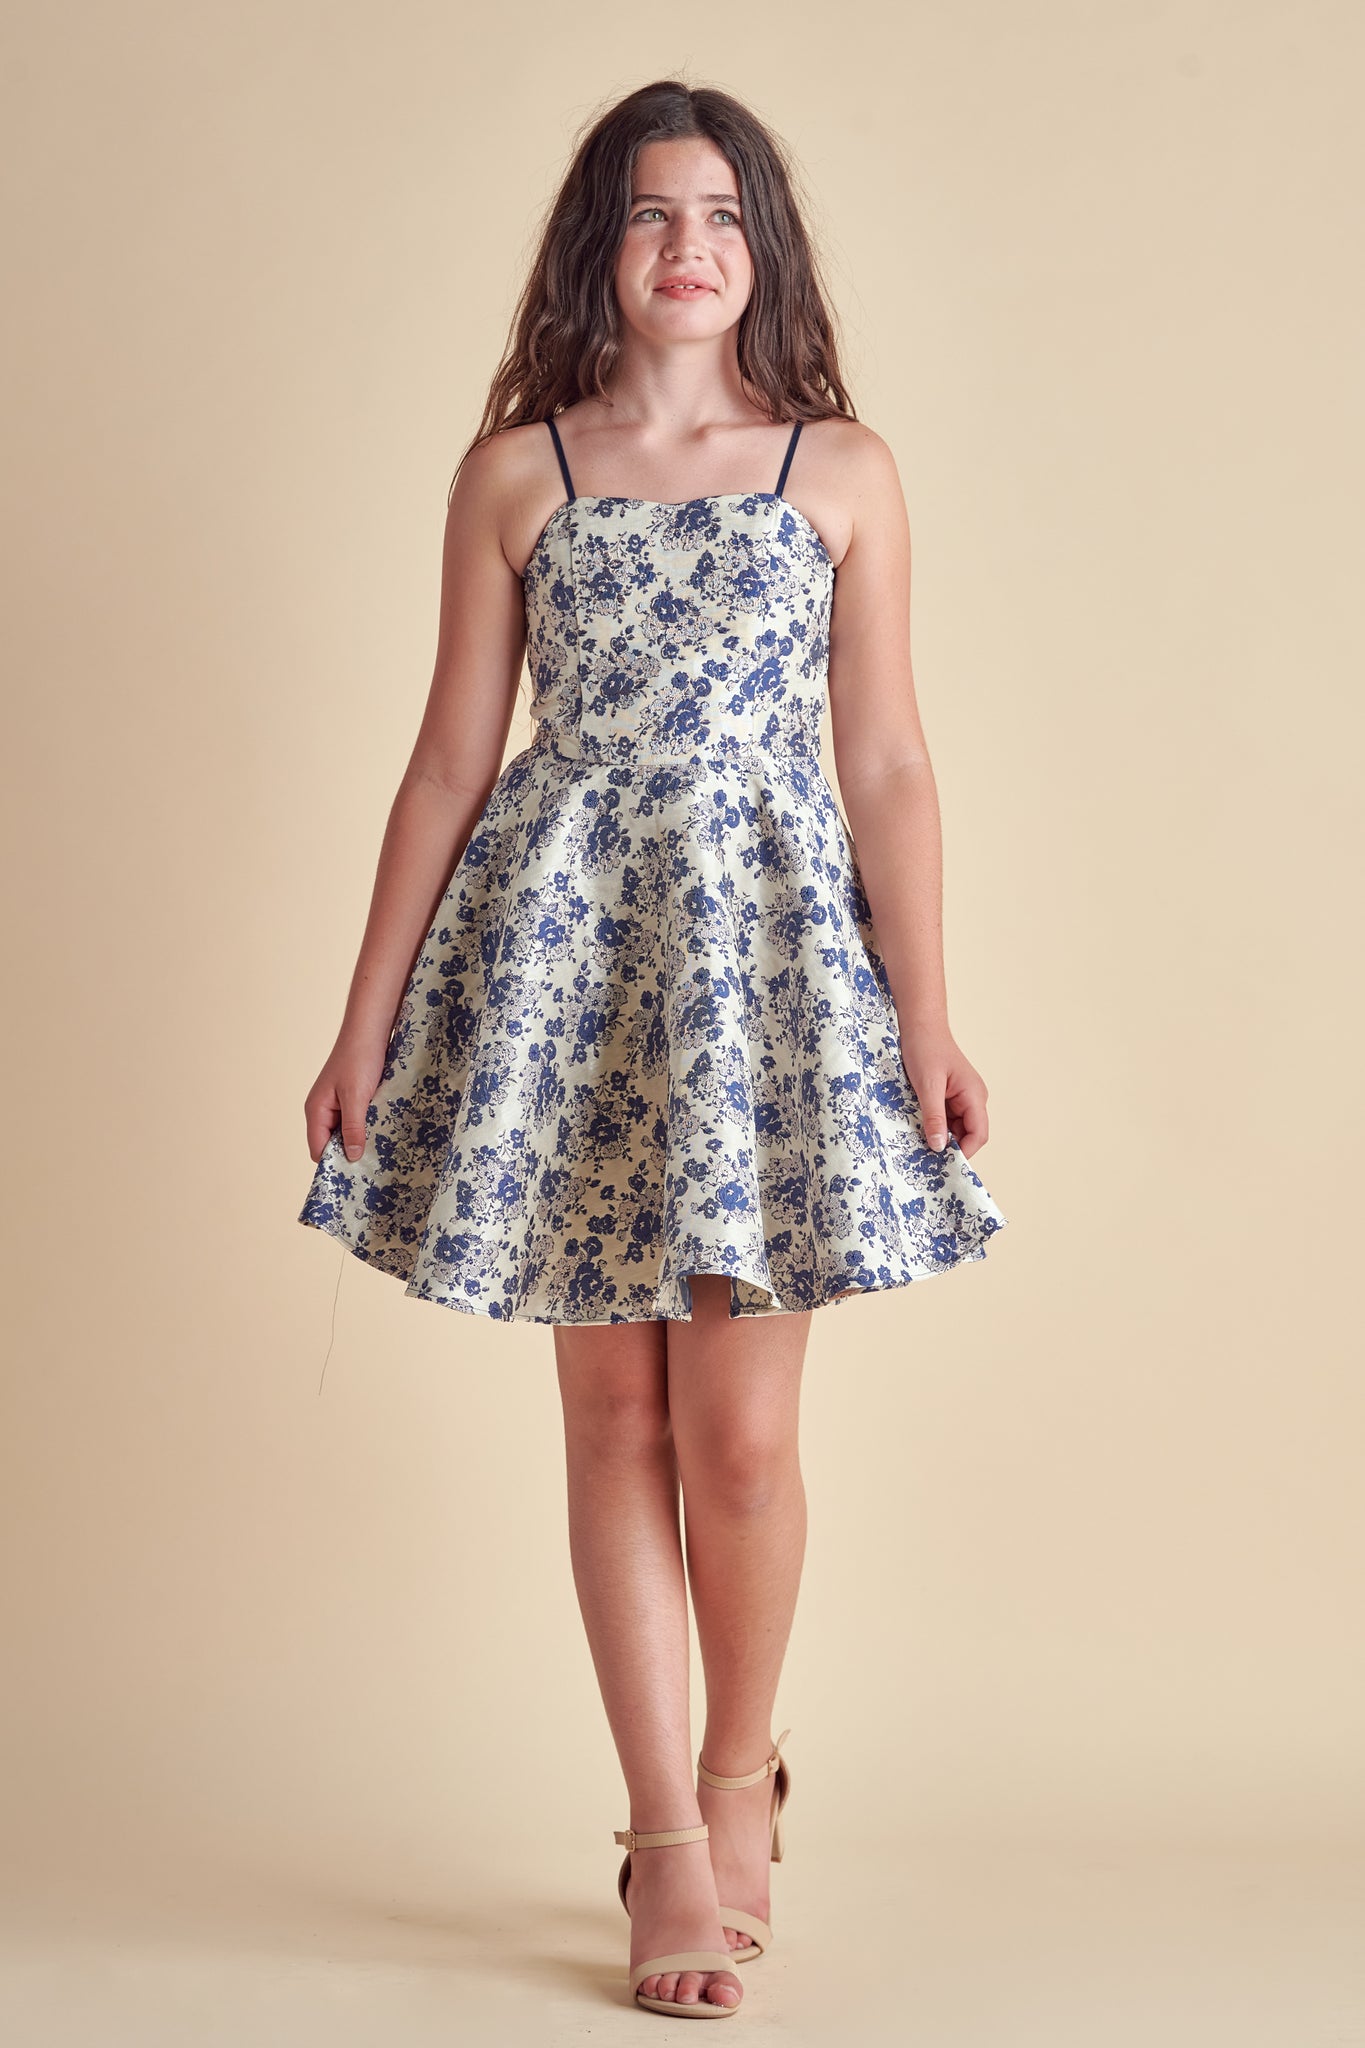 Young girl in a blue floral fit and flare dress.